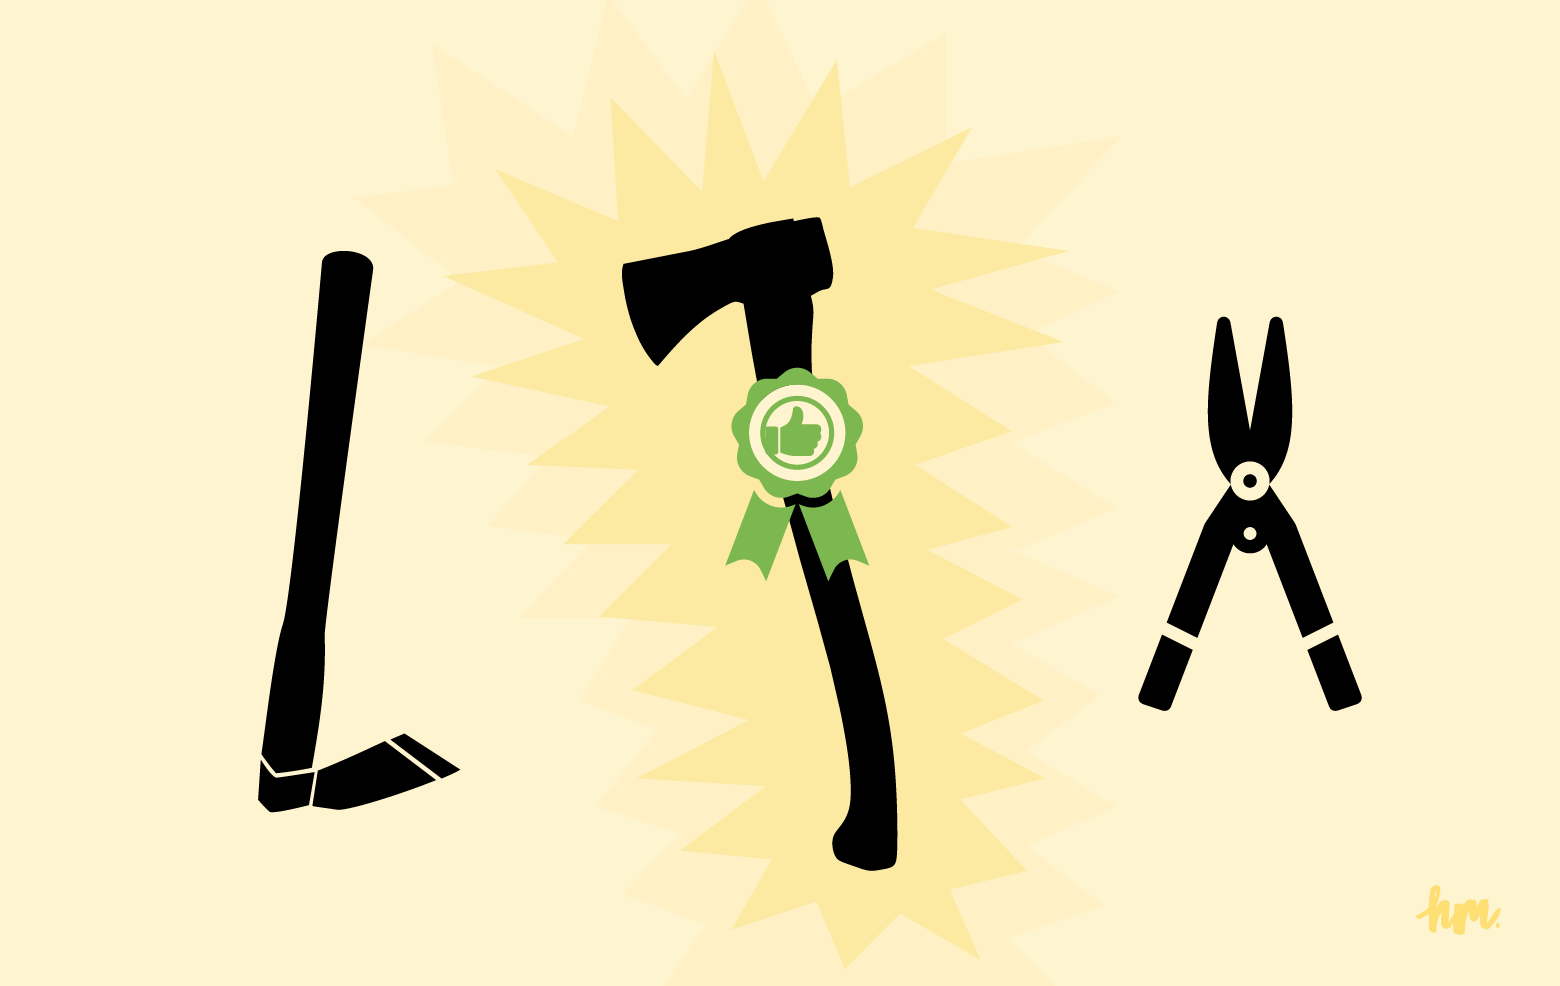 Illustration for the post "I removed a dead root...with an ax." Illustration of garden tools in a row: a hoe, an ax, and hedge shears. The ax is surrounded by light and has a green ribbon on it with a thumbs up symbol in the middle.